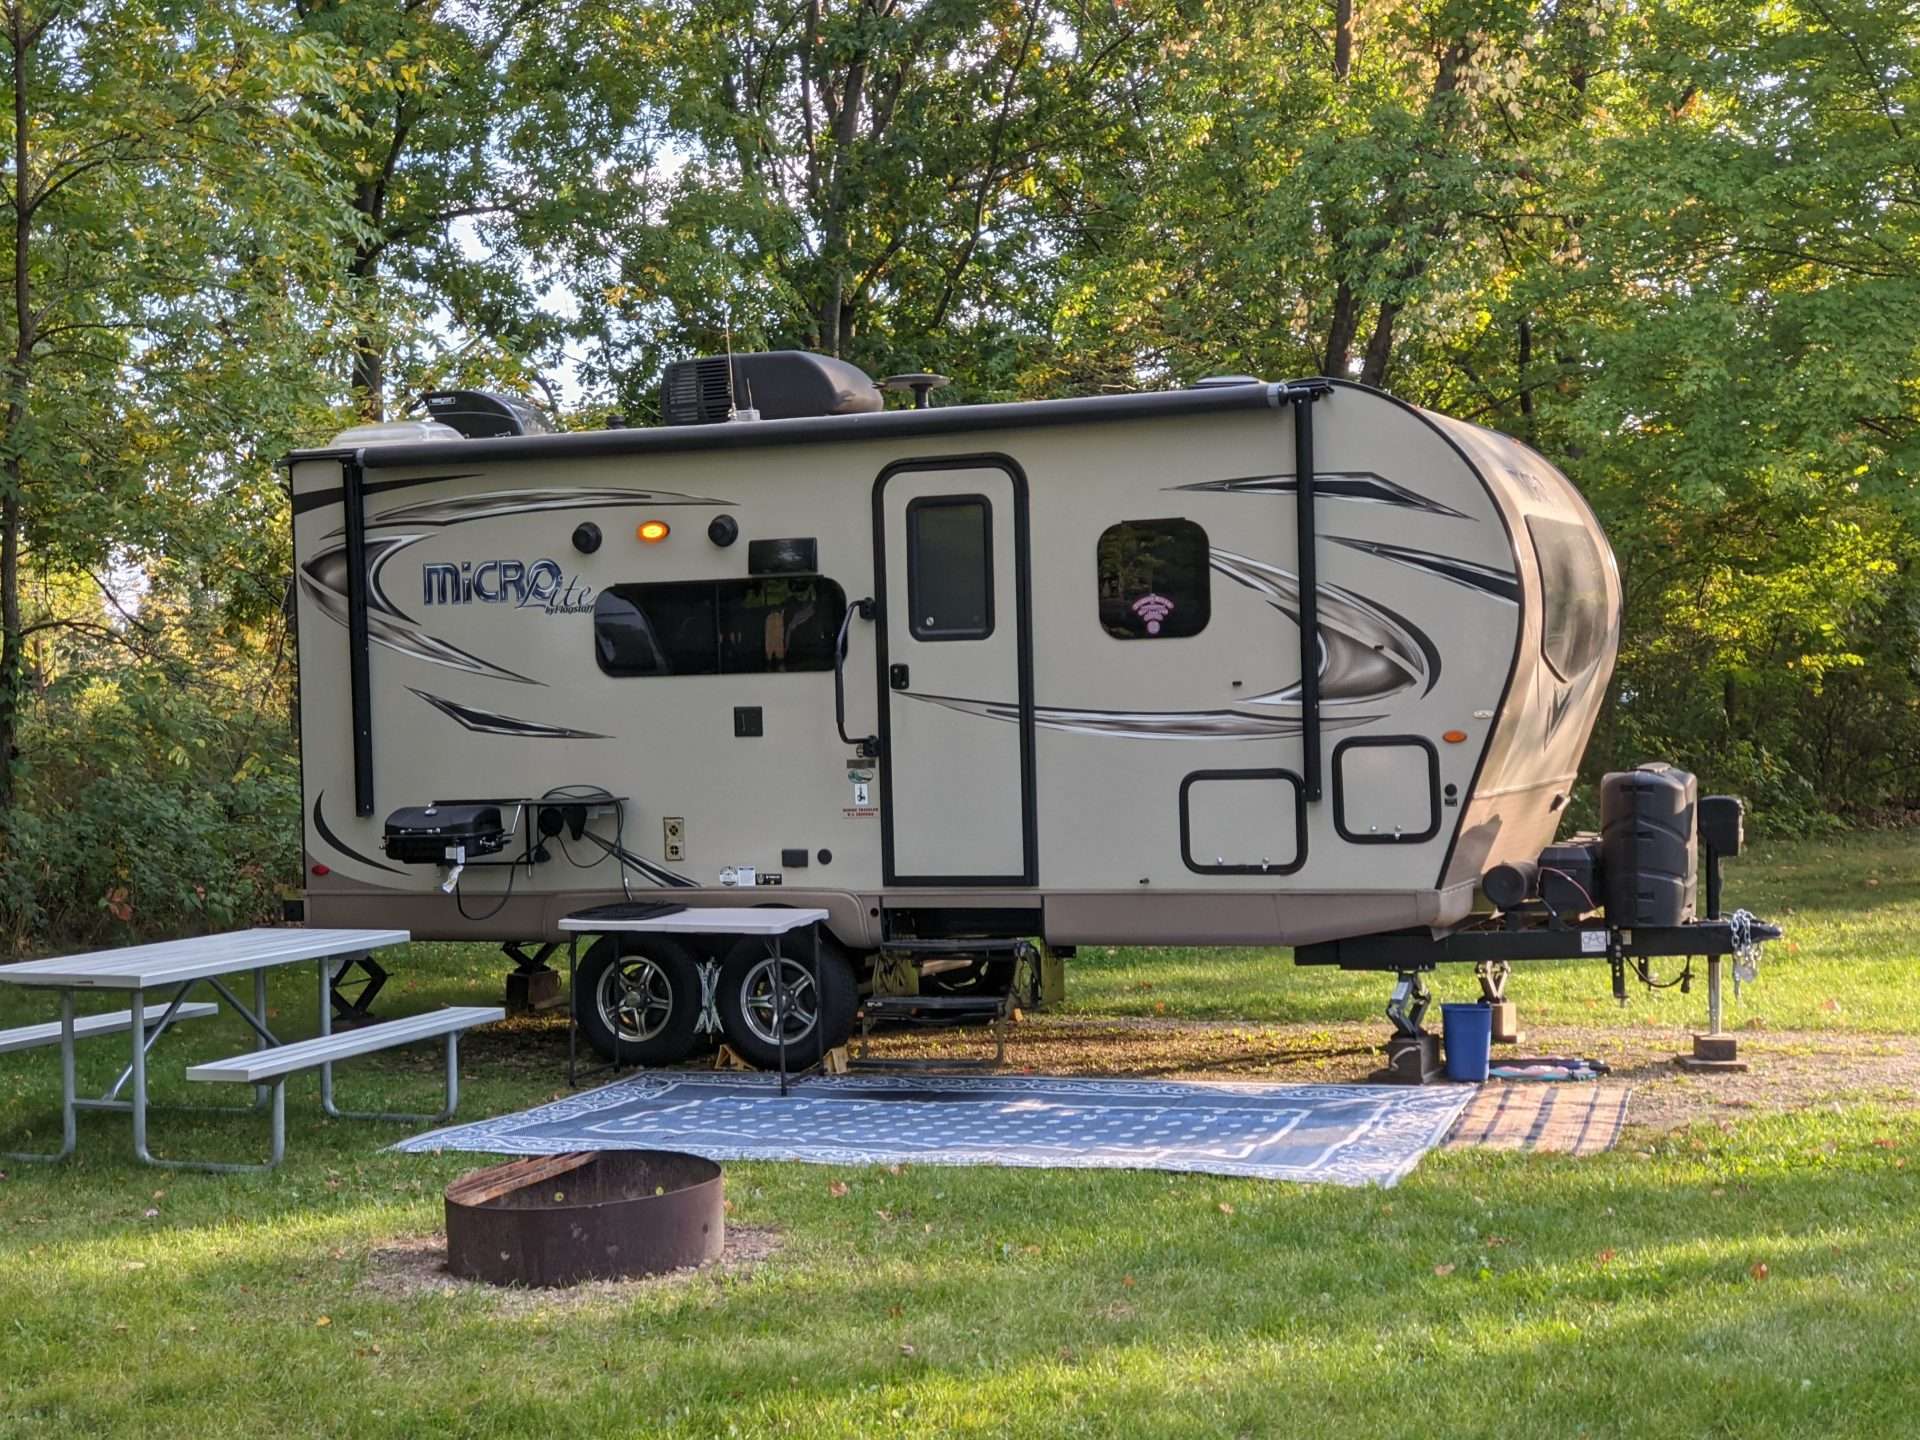 RV with outdoor rug next to it.